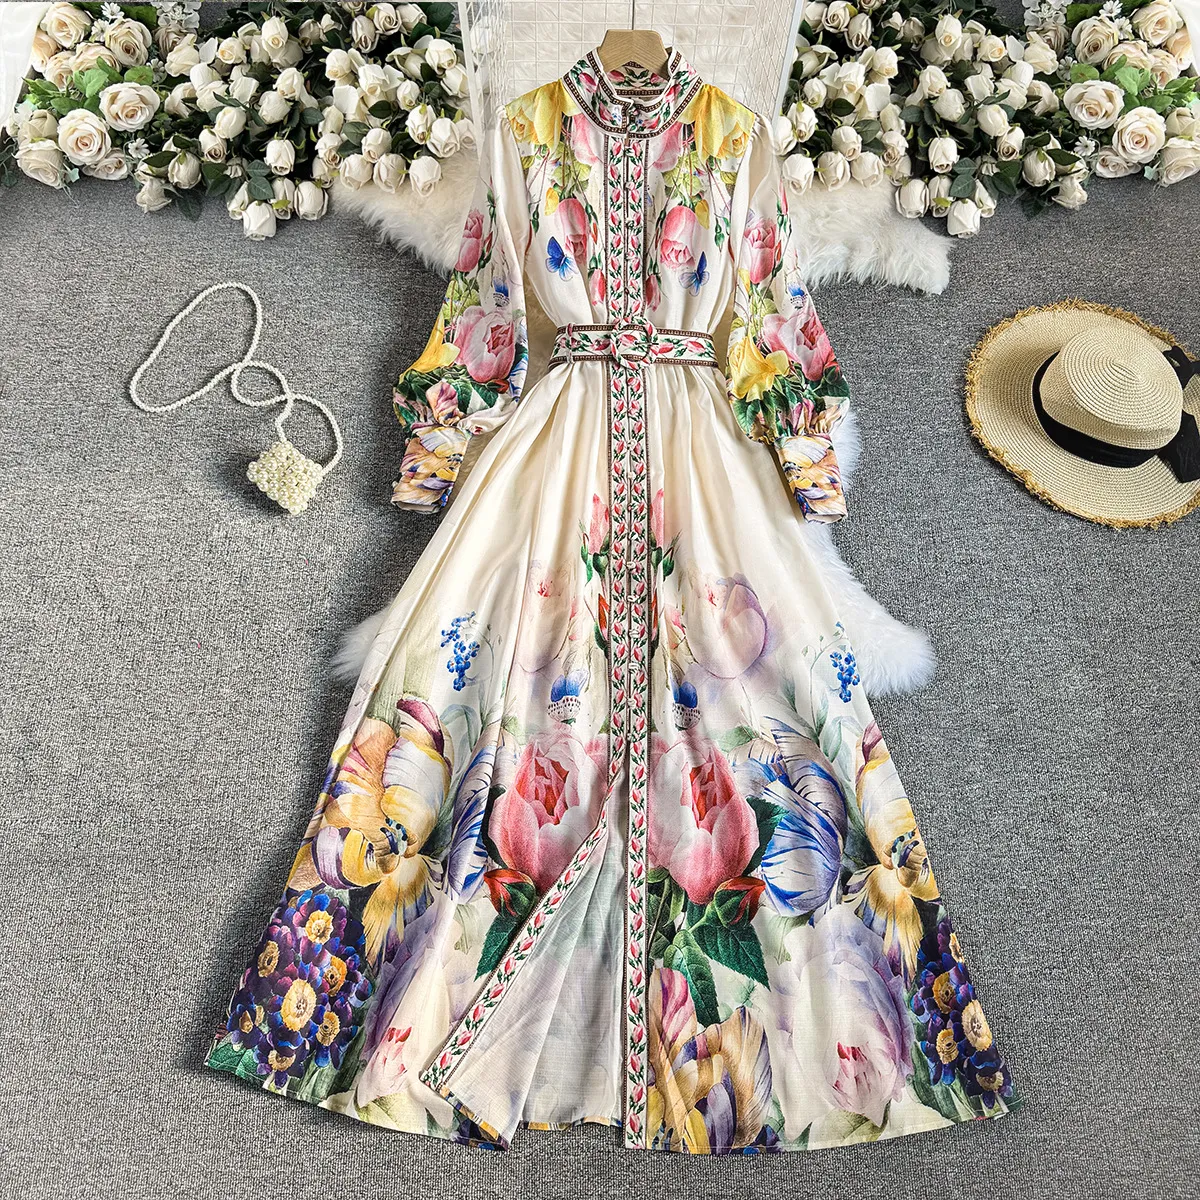 Fanhua series French retro palace style dress, spring dress for women with design sense, printed slim fit, long and elegant dress